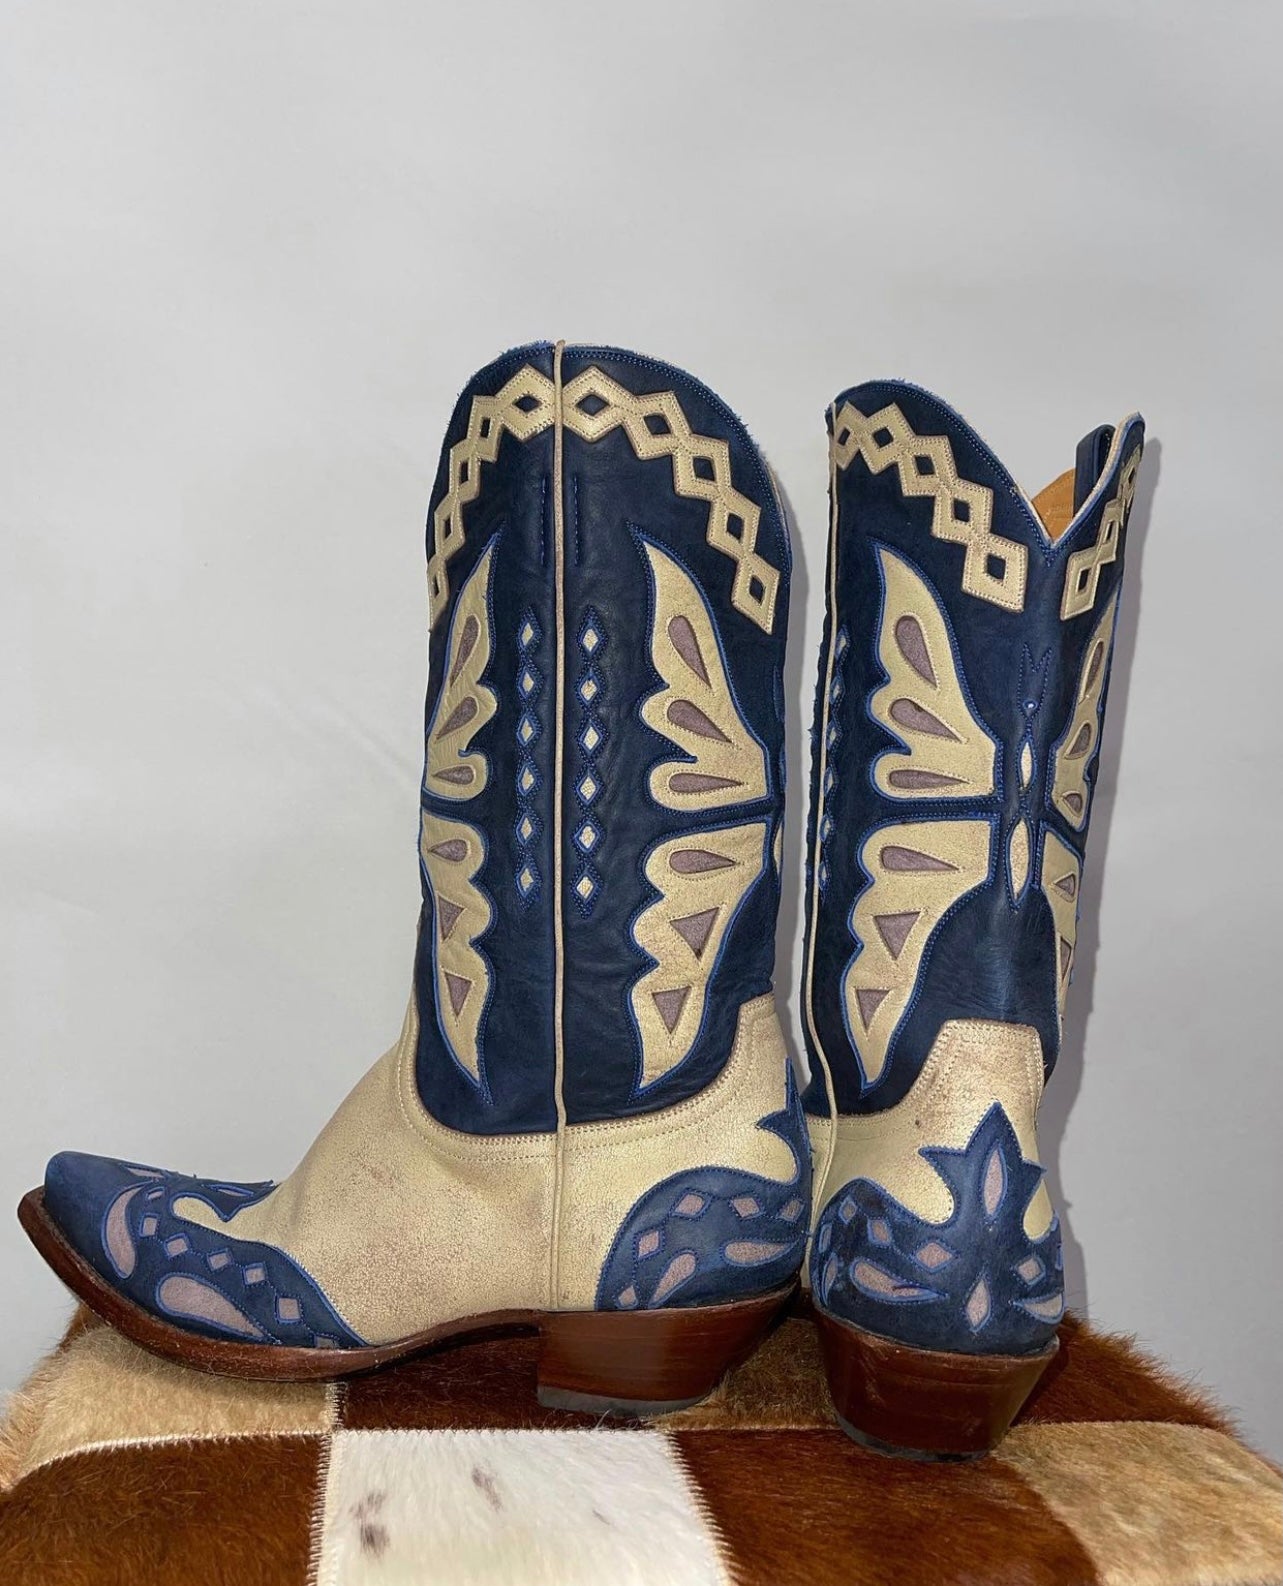 The Old Gringo Butterfly Blue boots